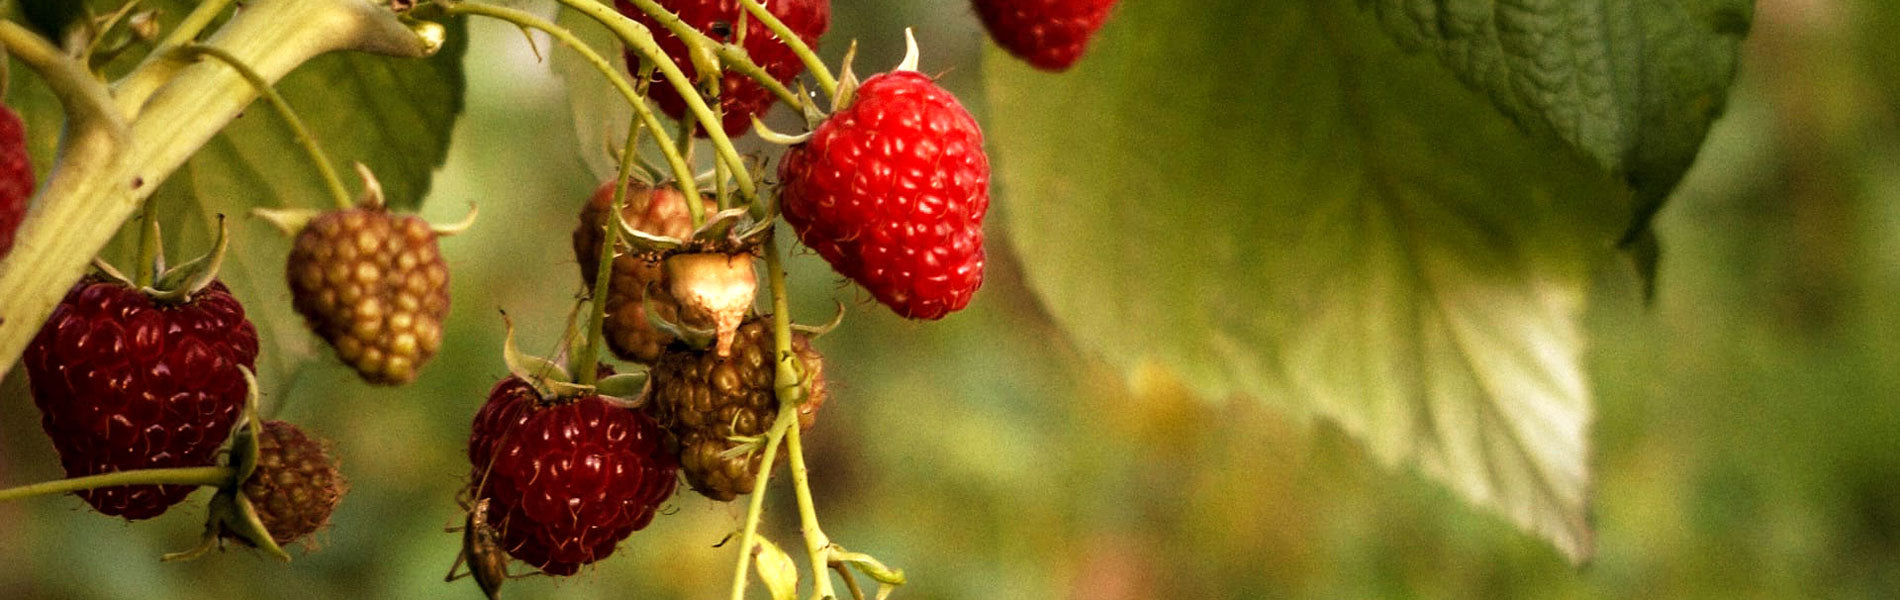 Raspberries in Autumn - Fruiting and Planting